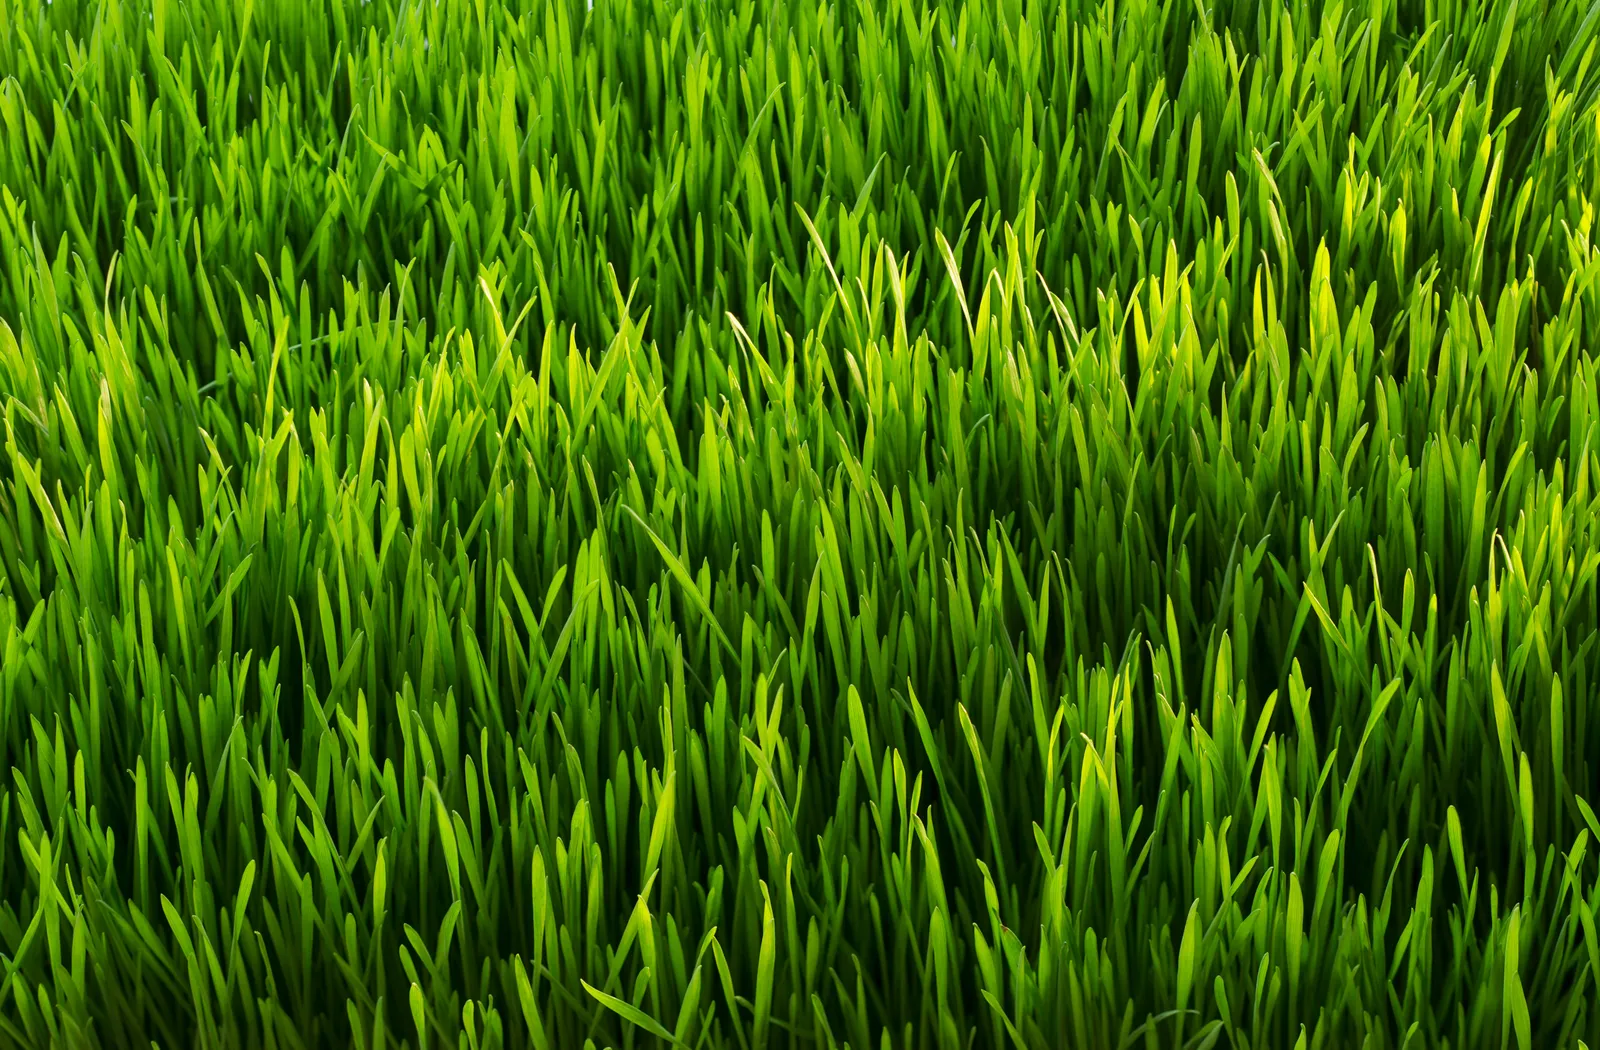 What Does Green Grass Symbolize